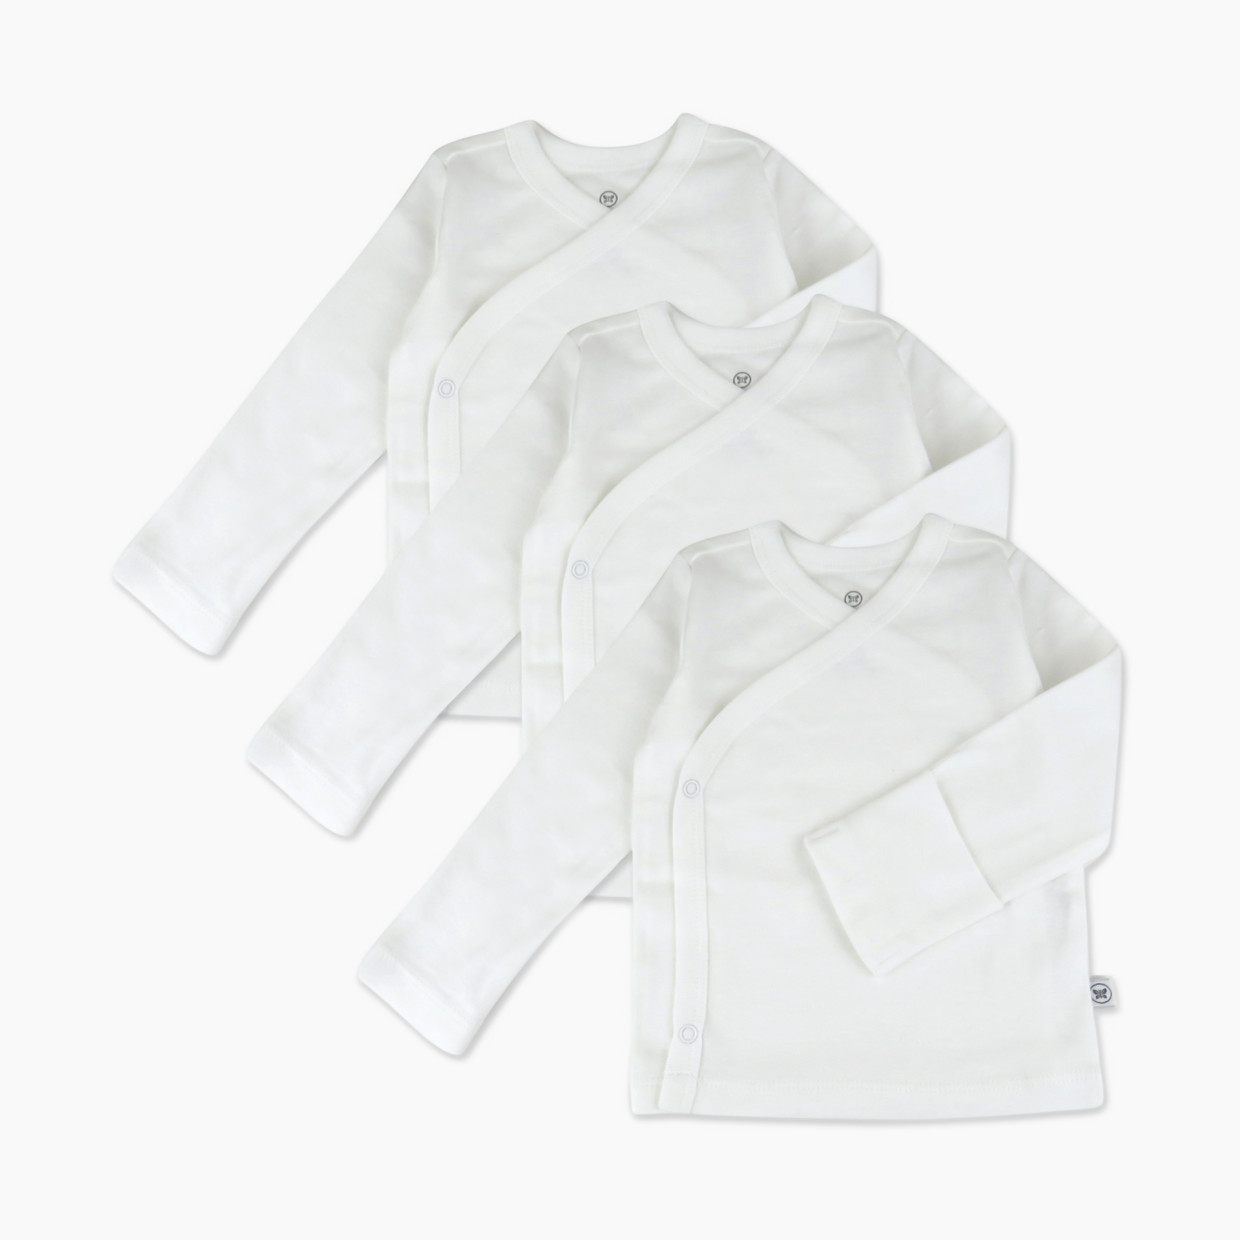 Honest Baby Clothing 3-Pack Organic Cotton Long Sleeve Side-Snap Tops - Bright White, 3-6 M.